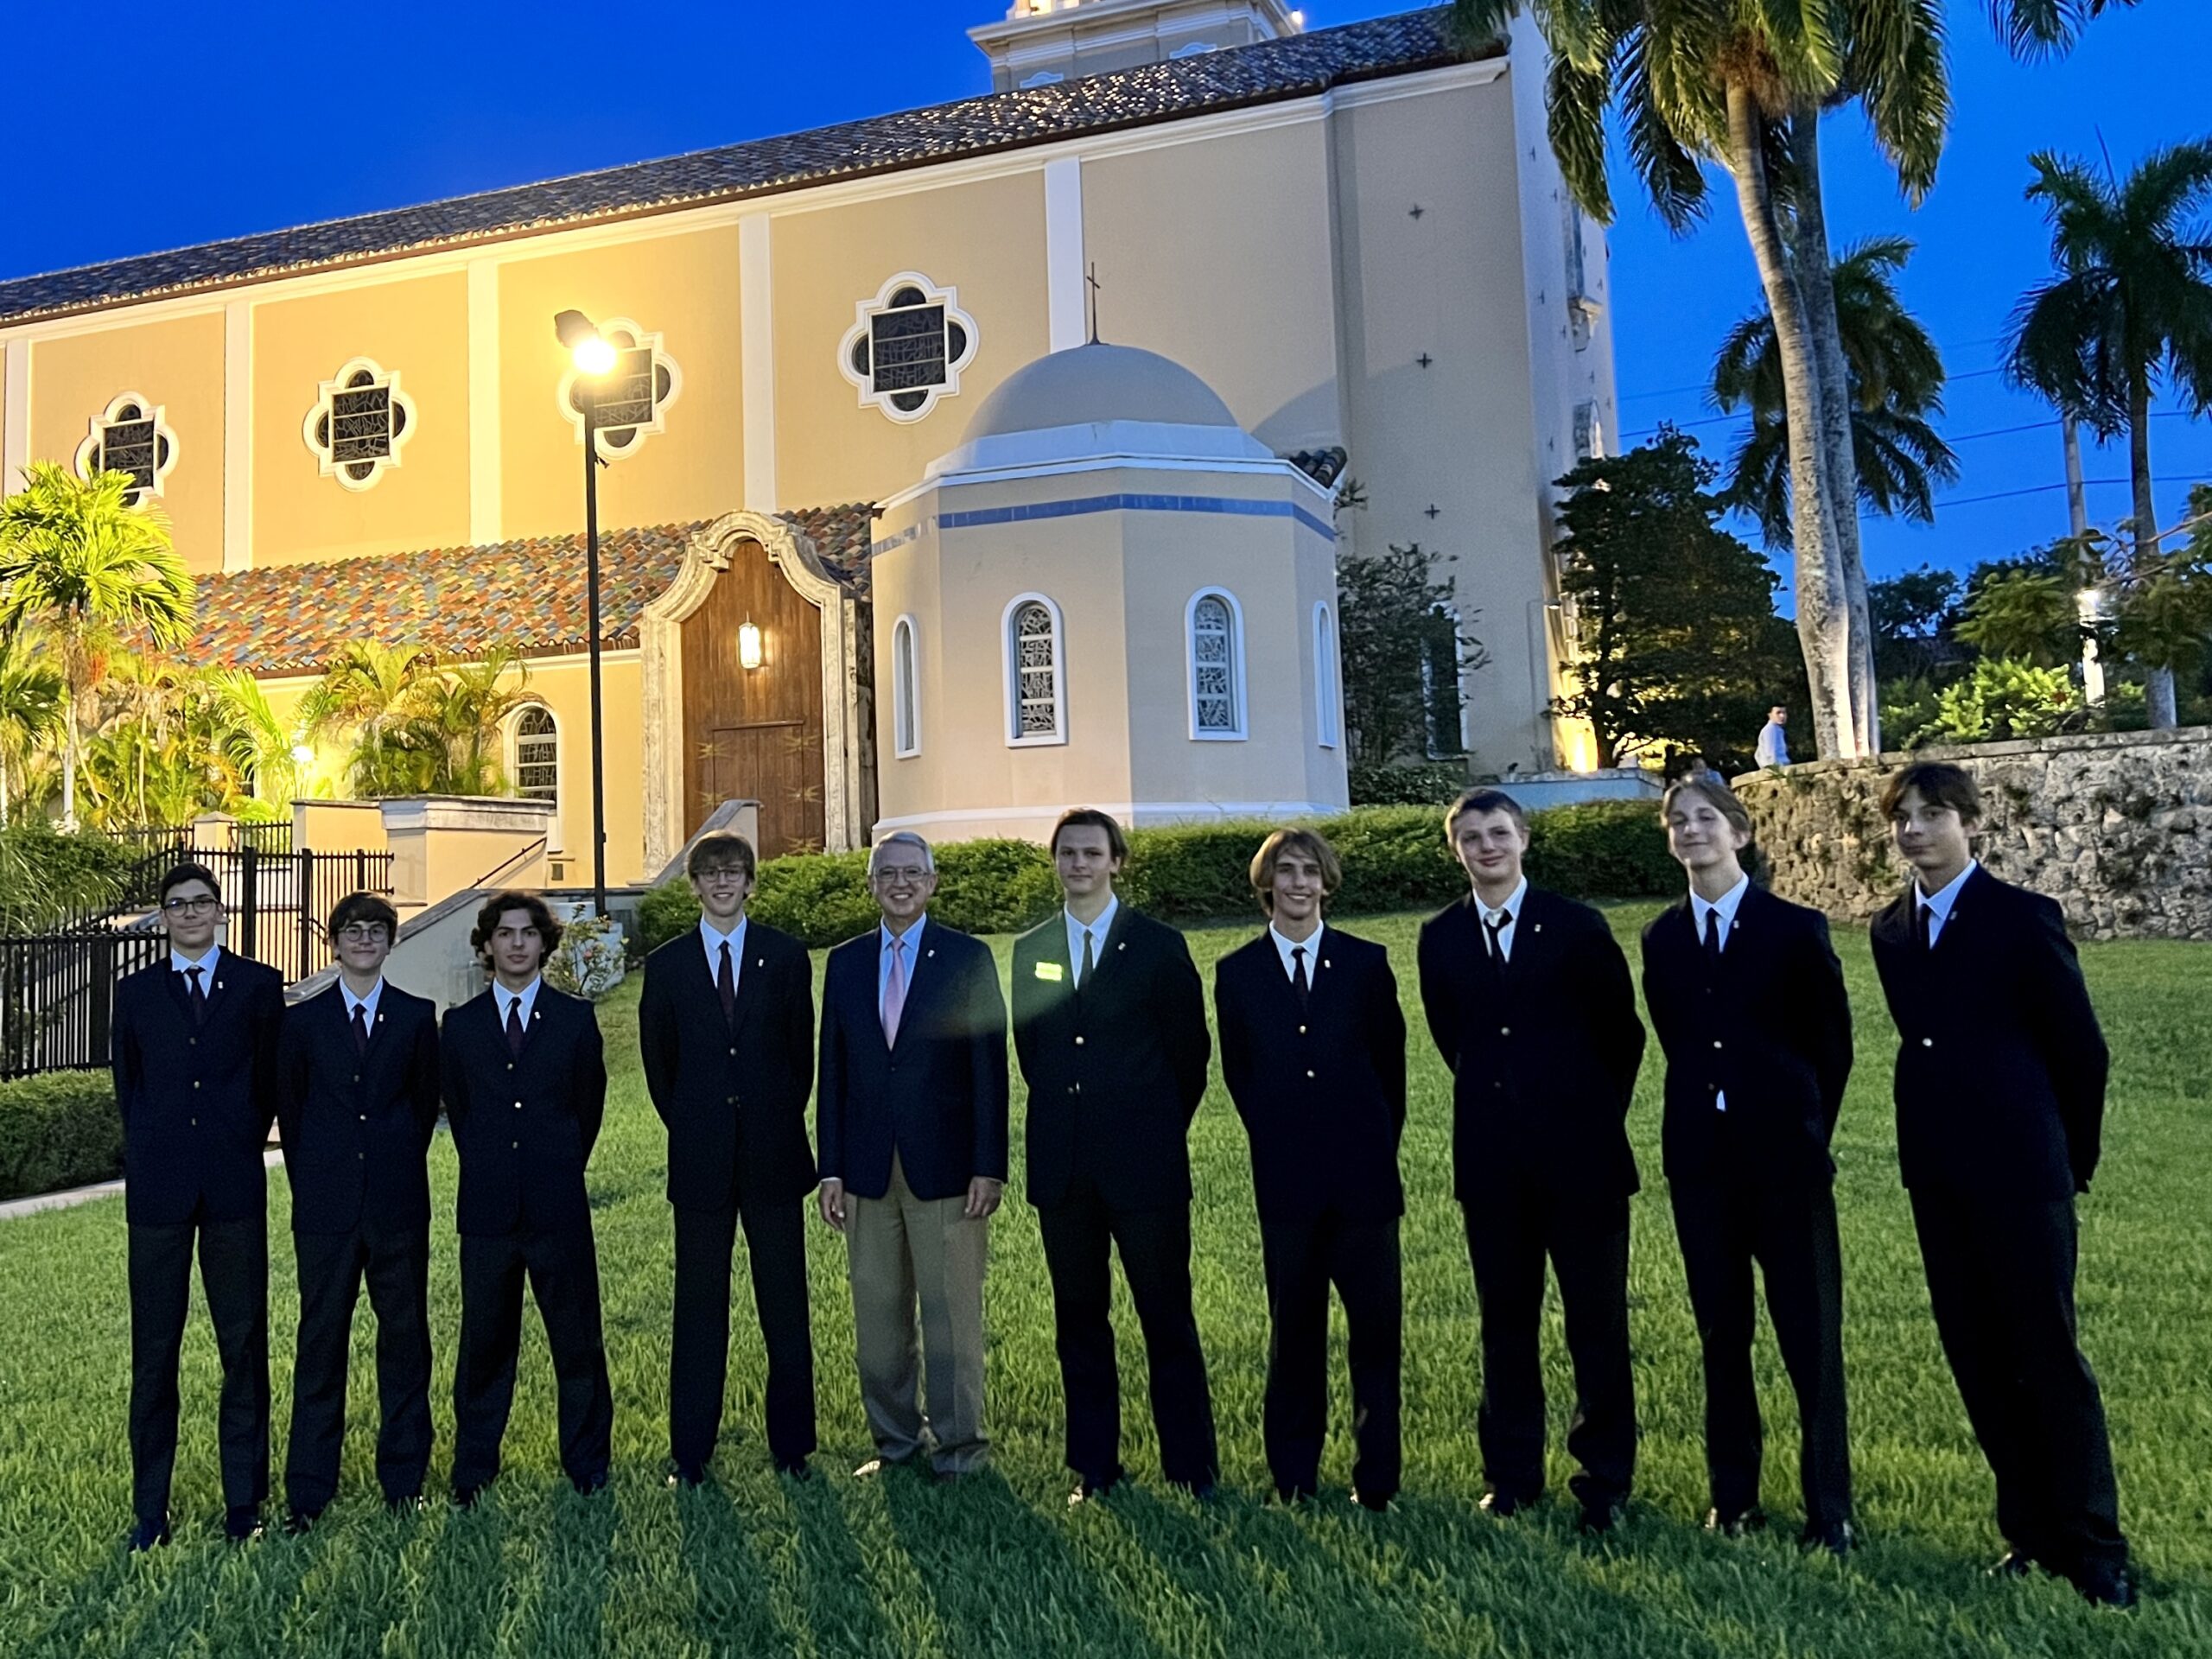 Outside the Cathedral of St. Mary, Miami, July 20